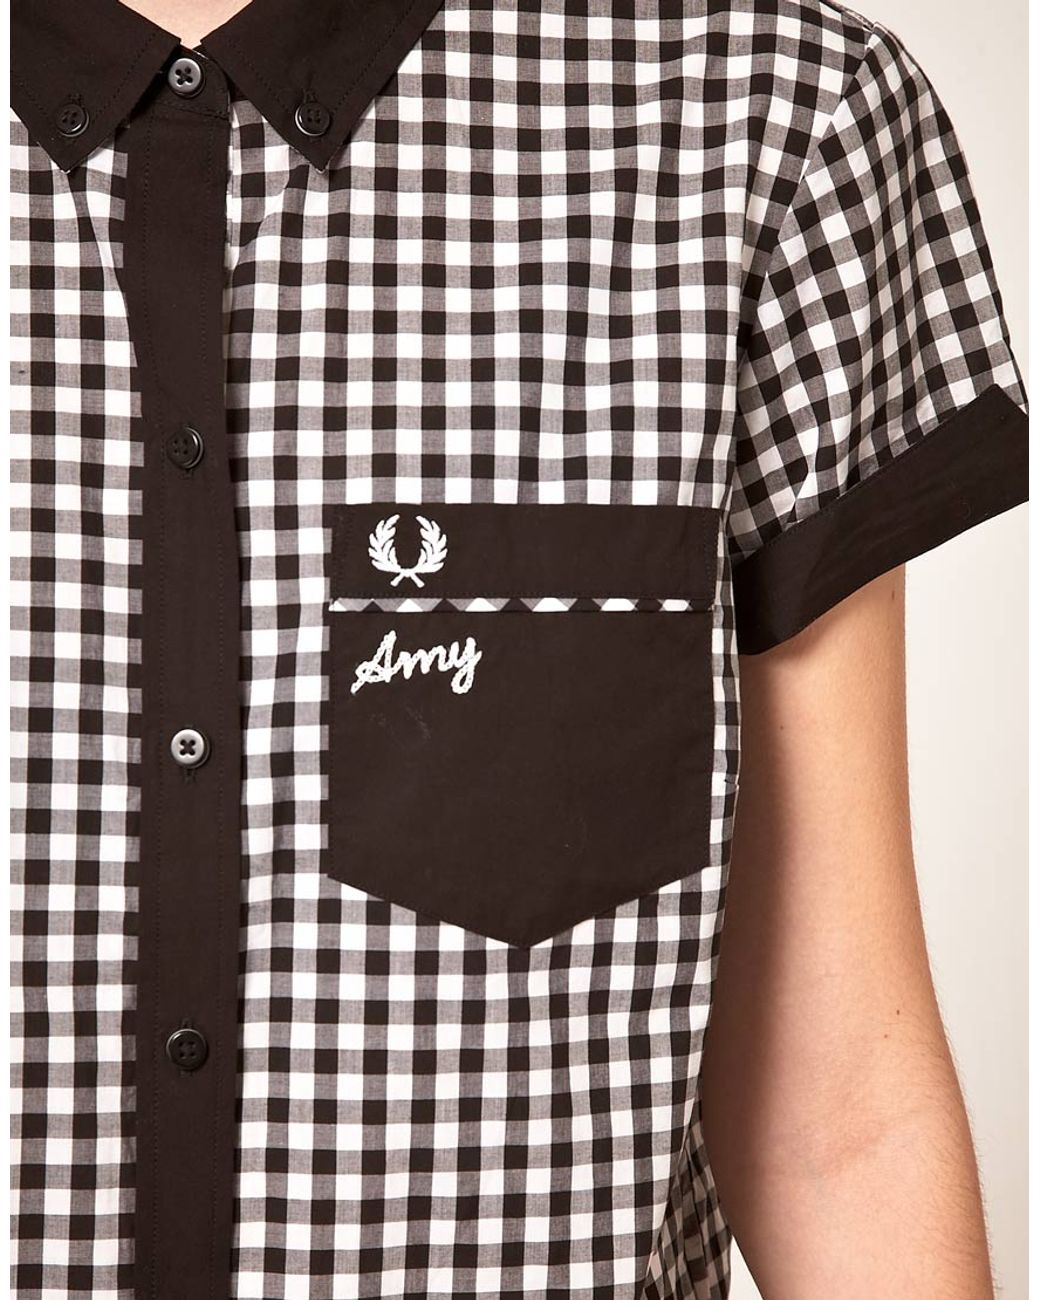 Fred Perry By Amy Winehouse Gingham Bowling Shirt in Black | Lyst